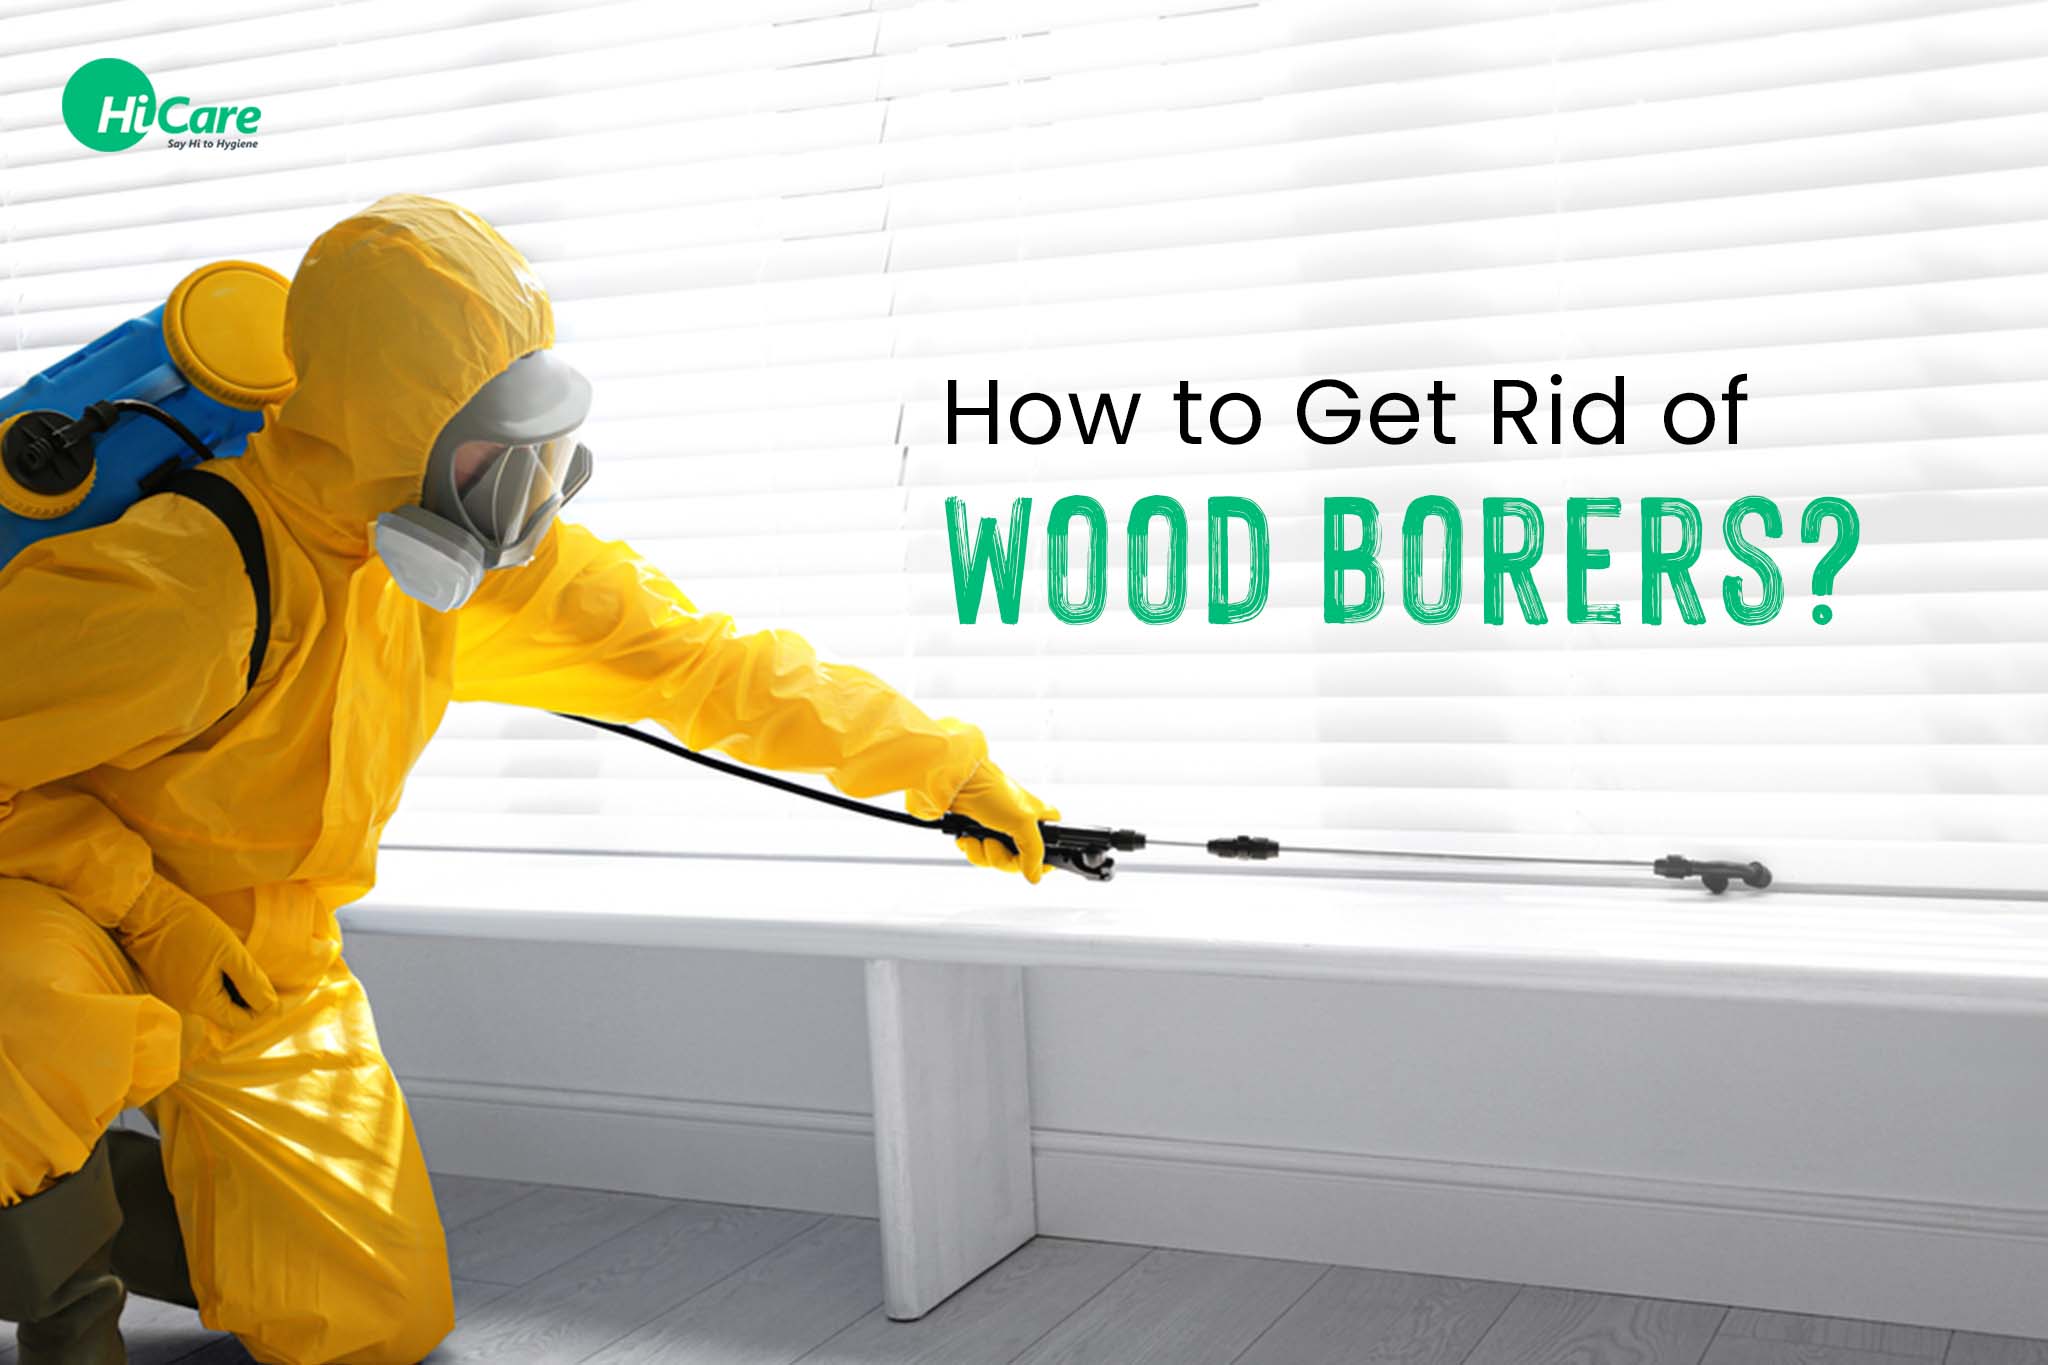 How to Get Rid of Wood Borers?